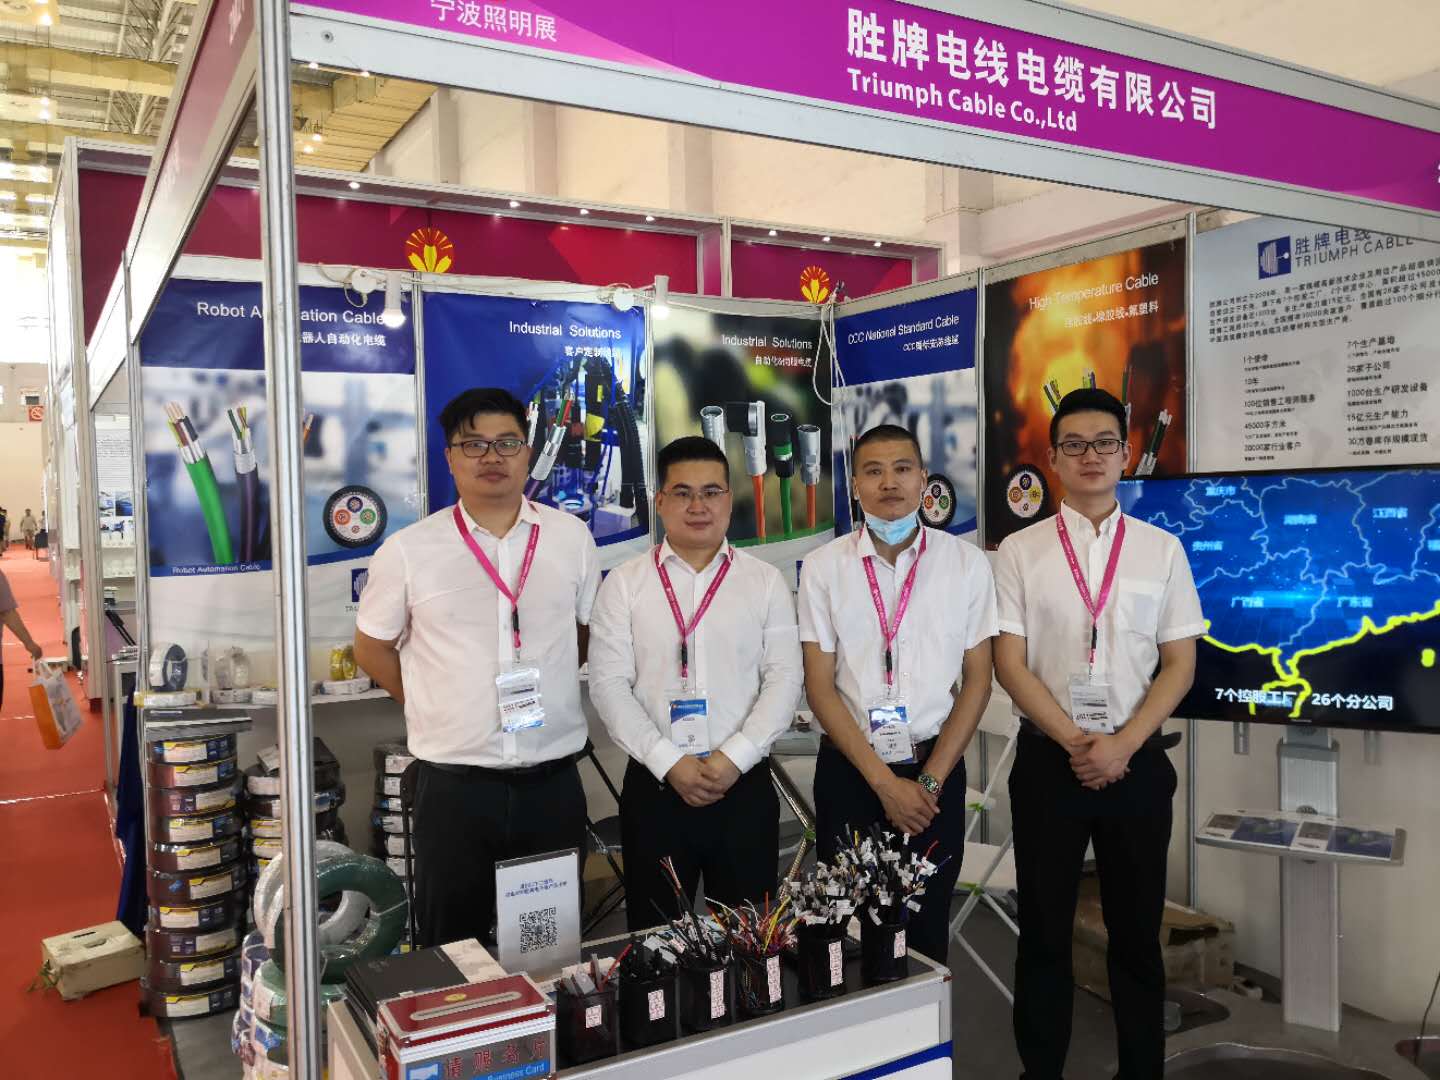 August 2020 Sheng brand wire and cable exhibition schedule